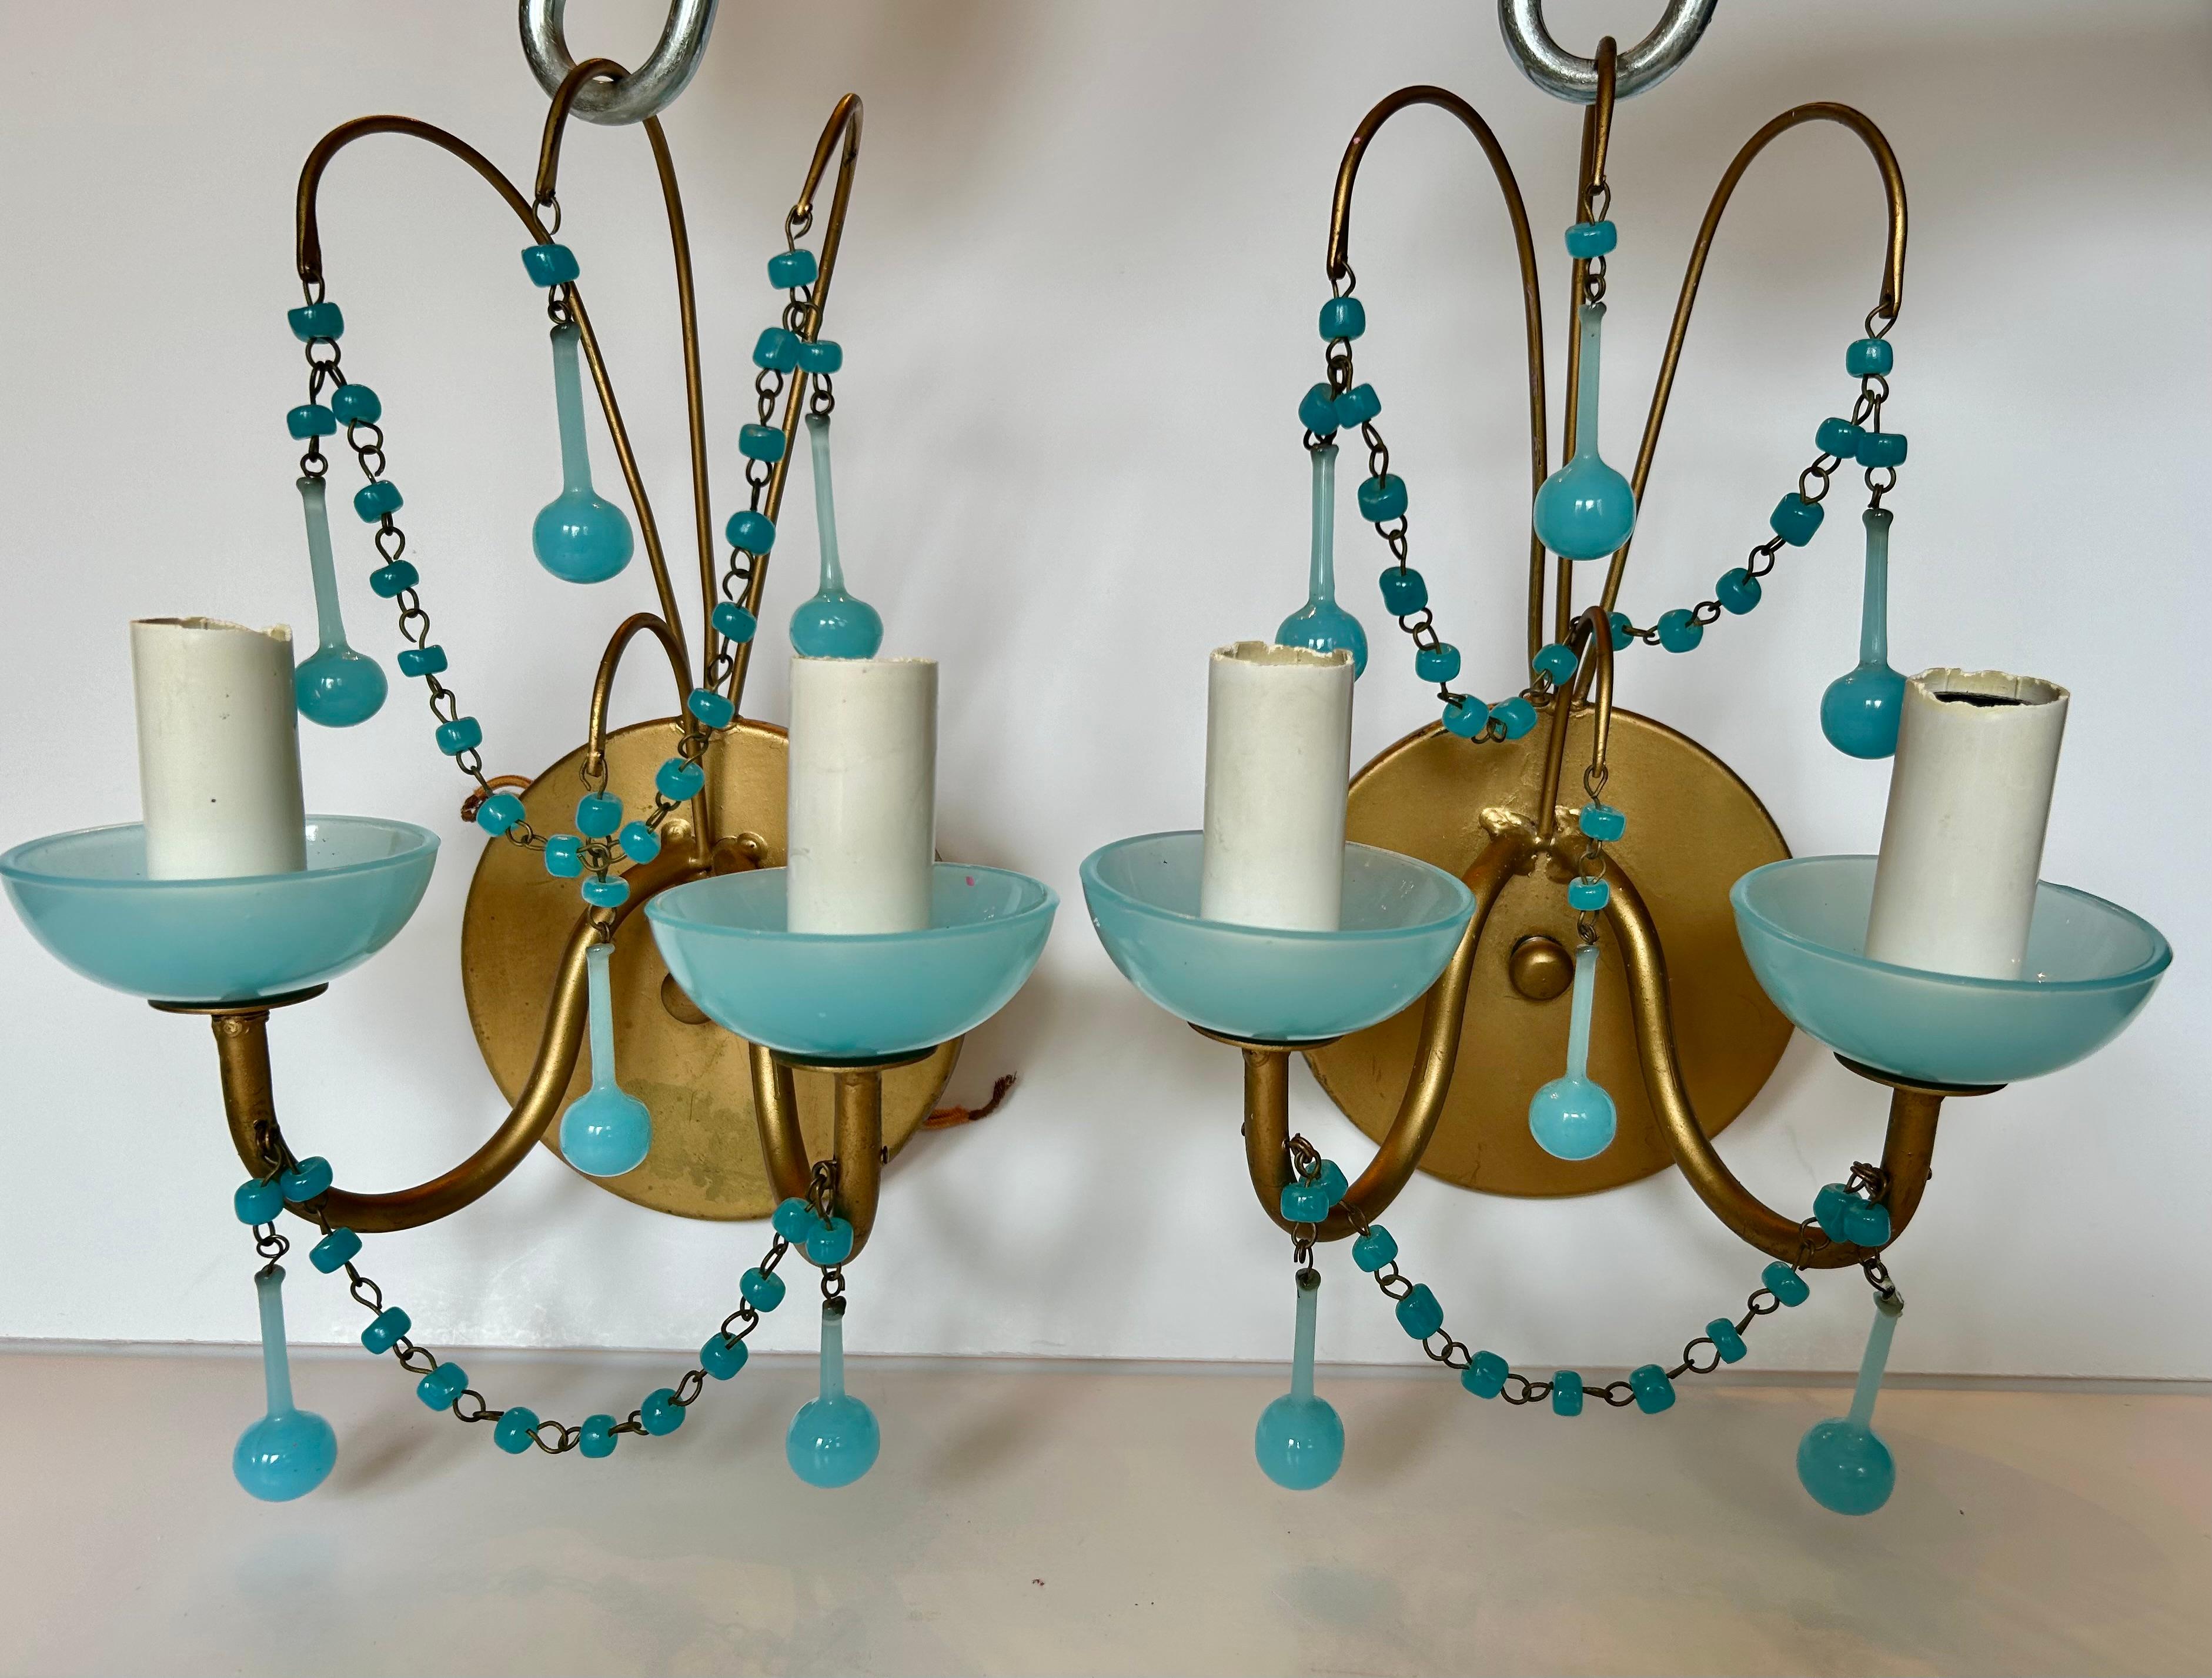 This is a  lovely pair vintage Murano glass, or opaline glass sconces in a deep aqua blue, circa 1930s. French, or possibly Italian.
Made of patinated metal and Murano glass beads and drops.
120 Volts. Each sconce with two sockets for chandelier